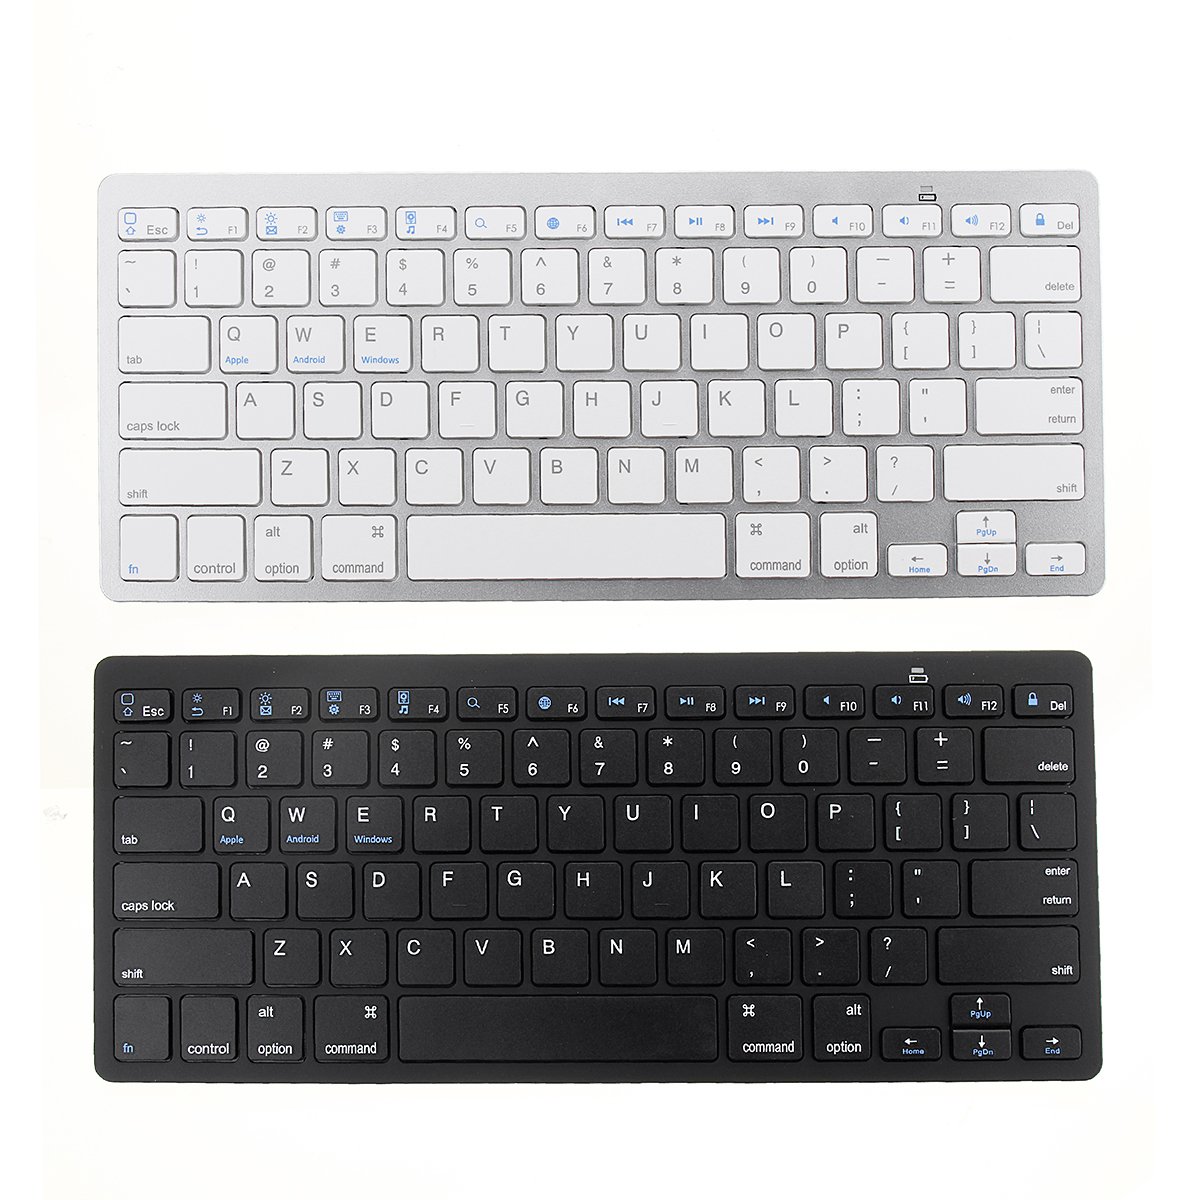 Wirelss bluetooth 3.0 Keyboard For iPhone iPad Macbook Samsung Tablet PC iOS Android Devices 2